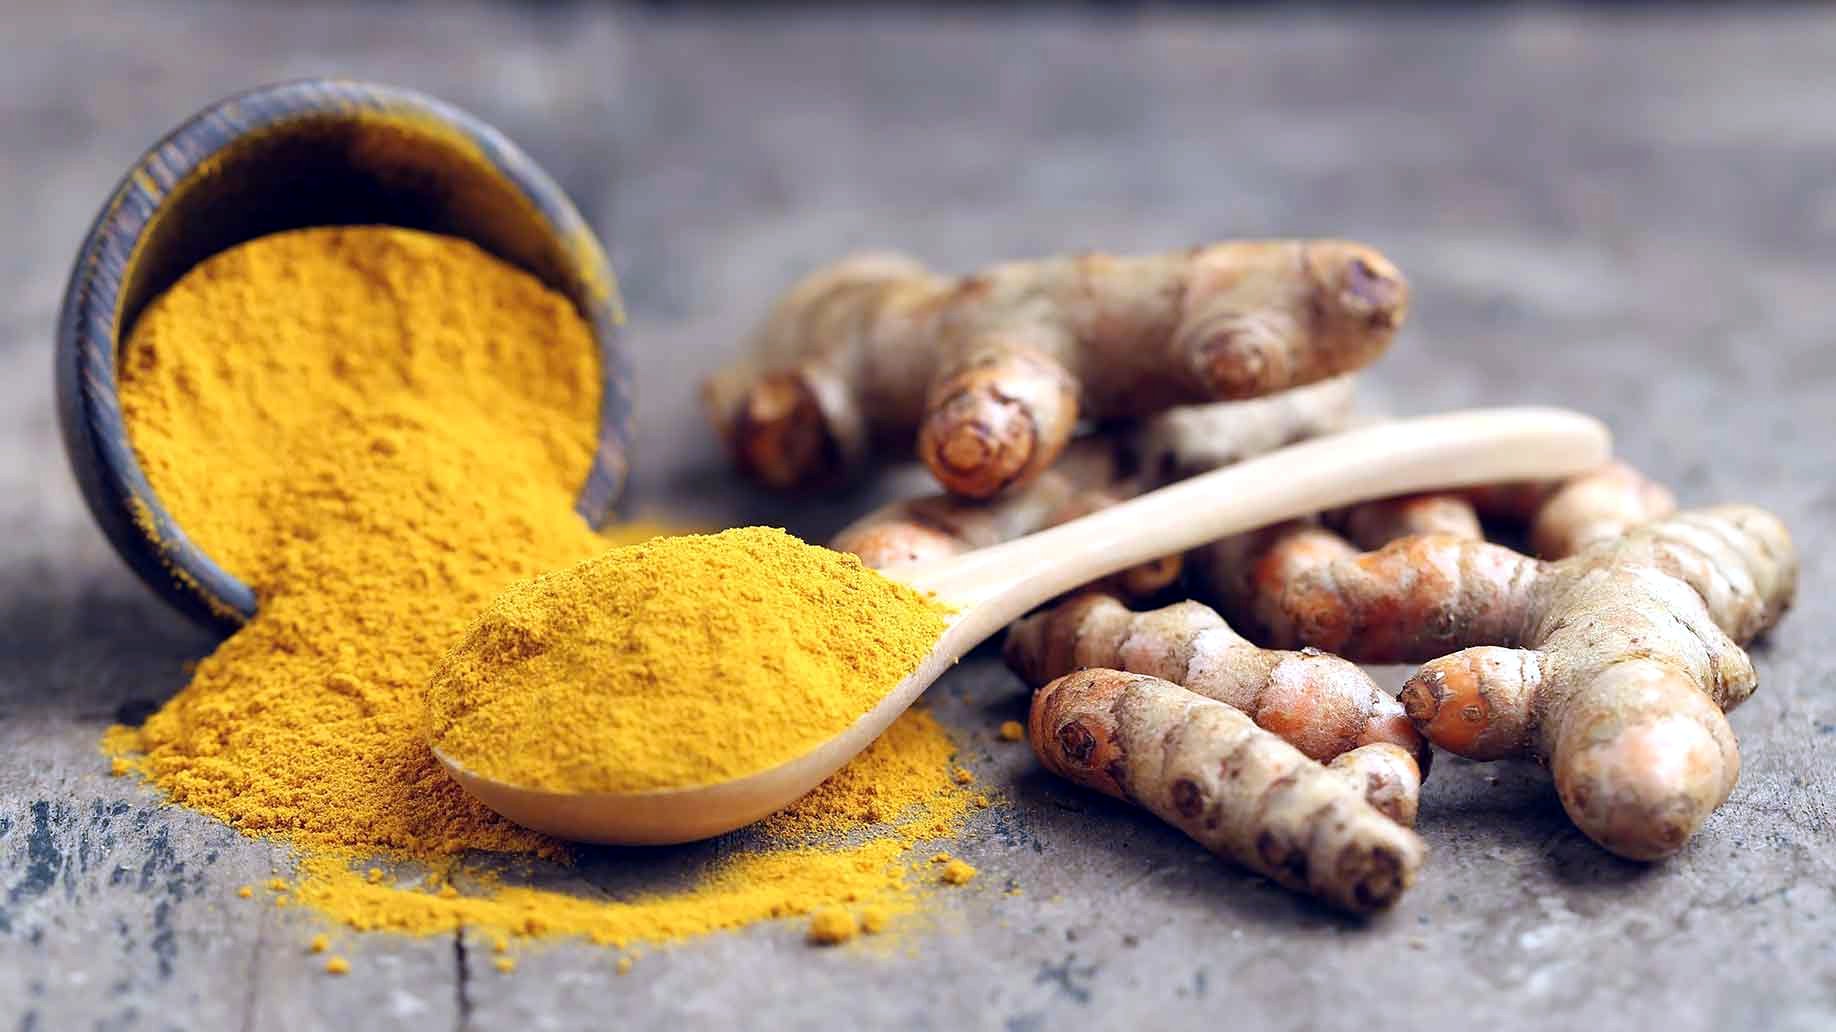 Turmeric: Does it Help with Male Fertility?